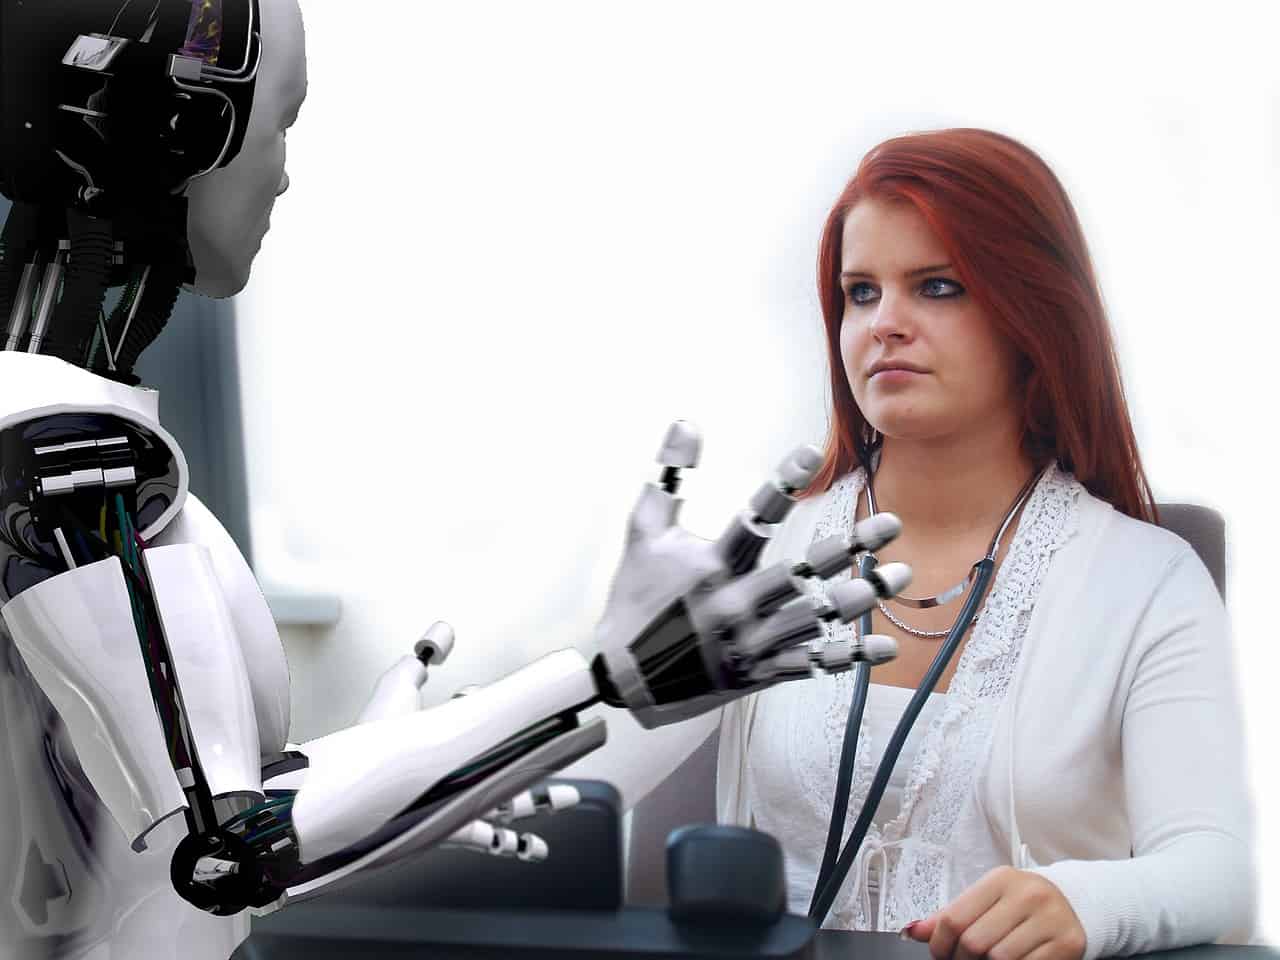 Robots can improve mental wellbeing at work – as long as they look right